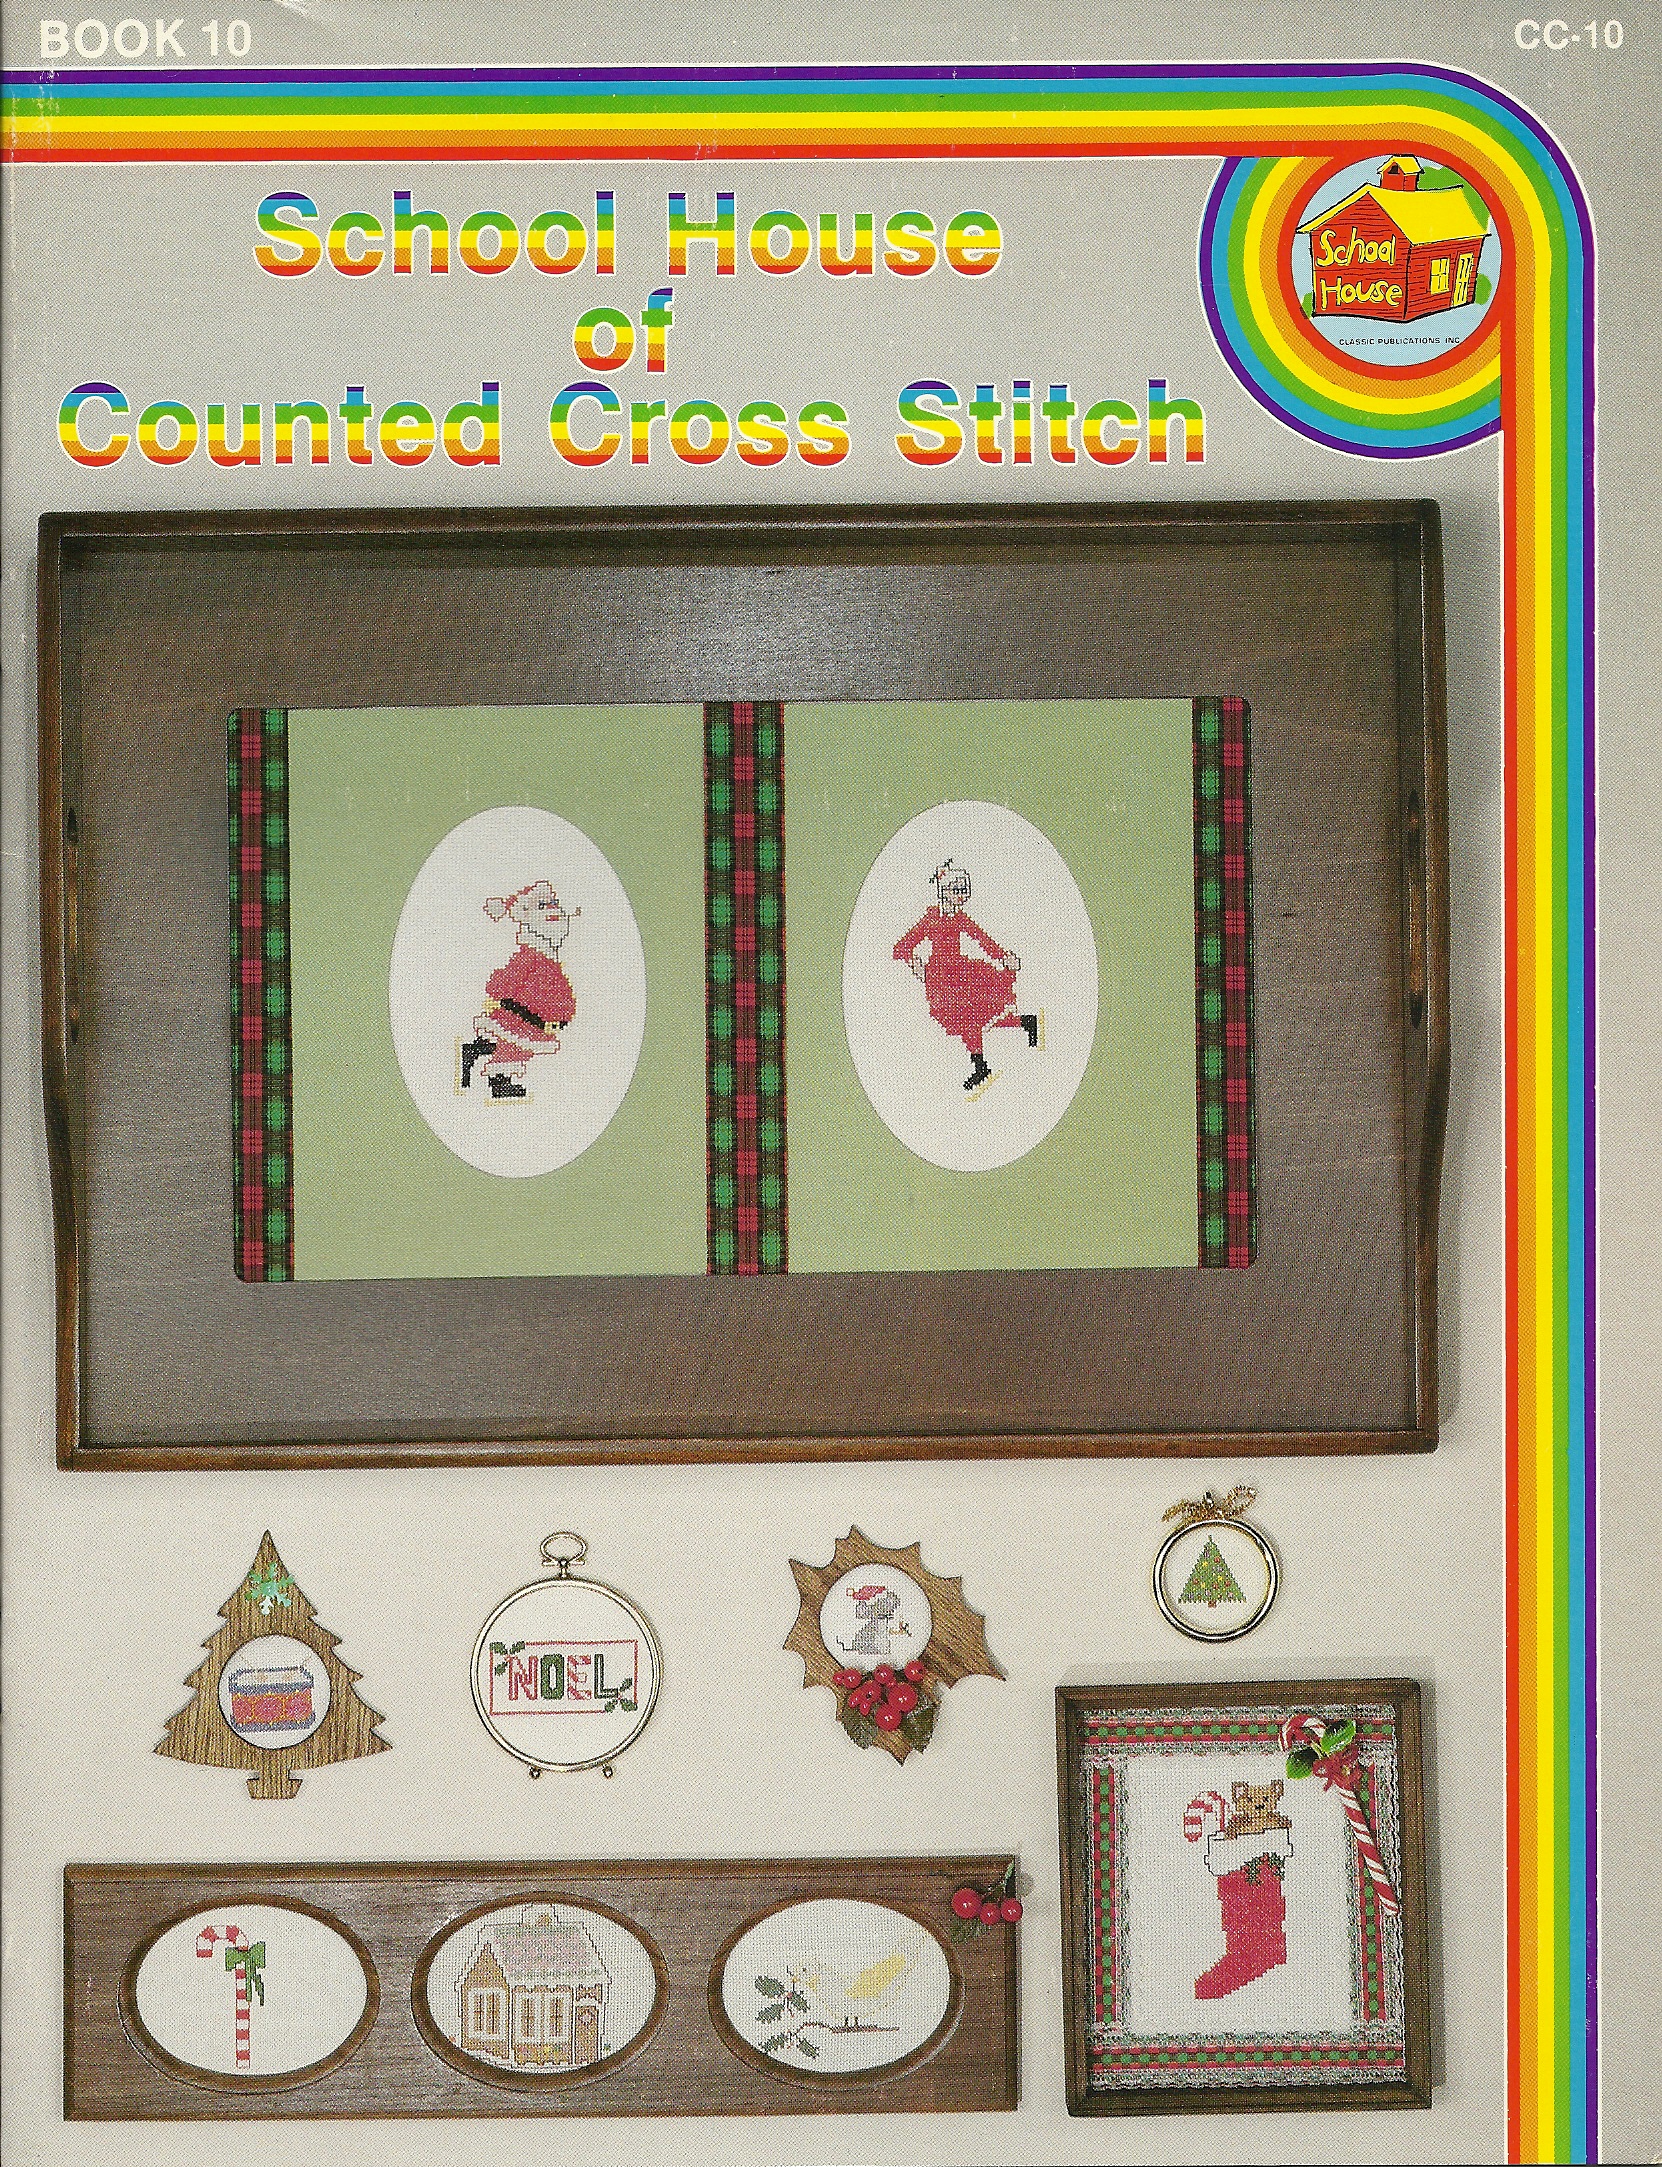 School House of Counted Cross Stitch  Book 10